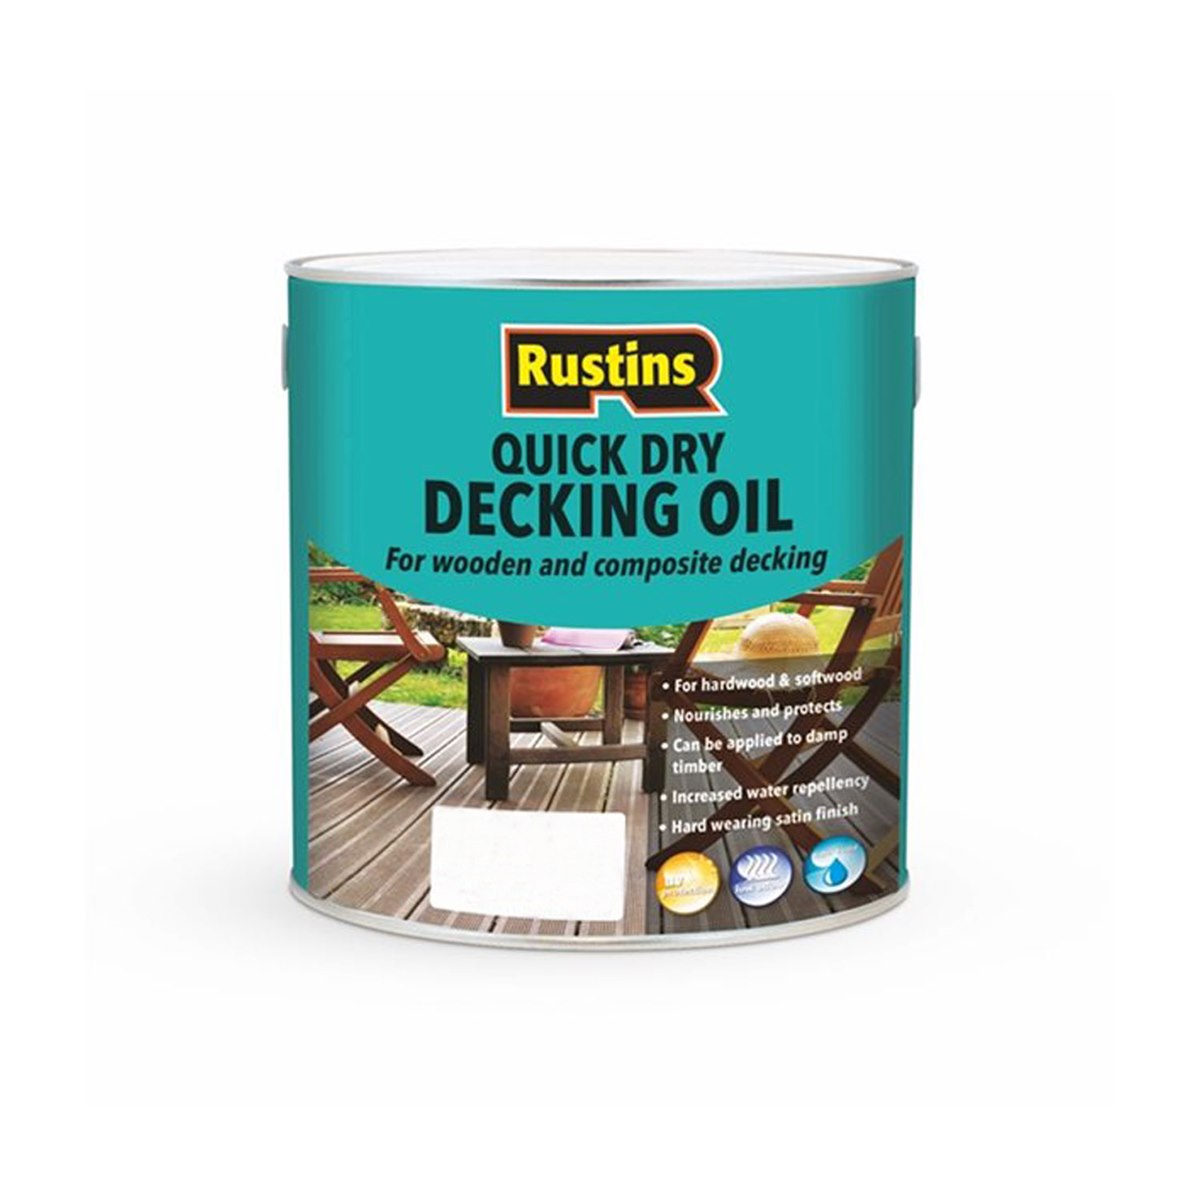 Rustins Quick Dry Decking Oil